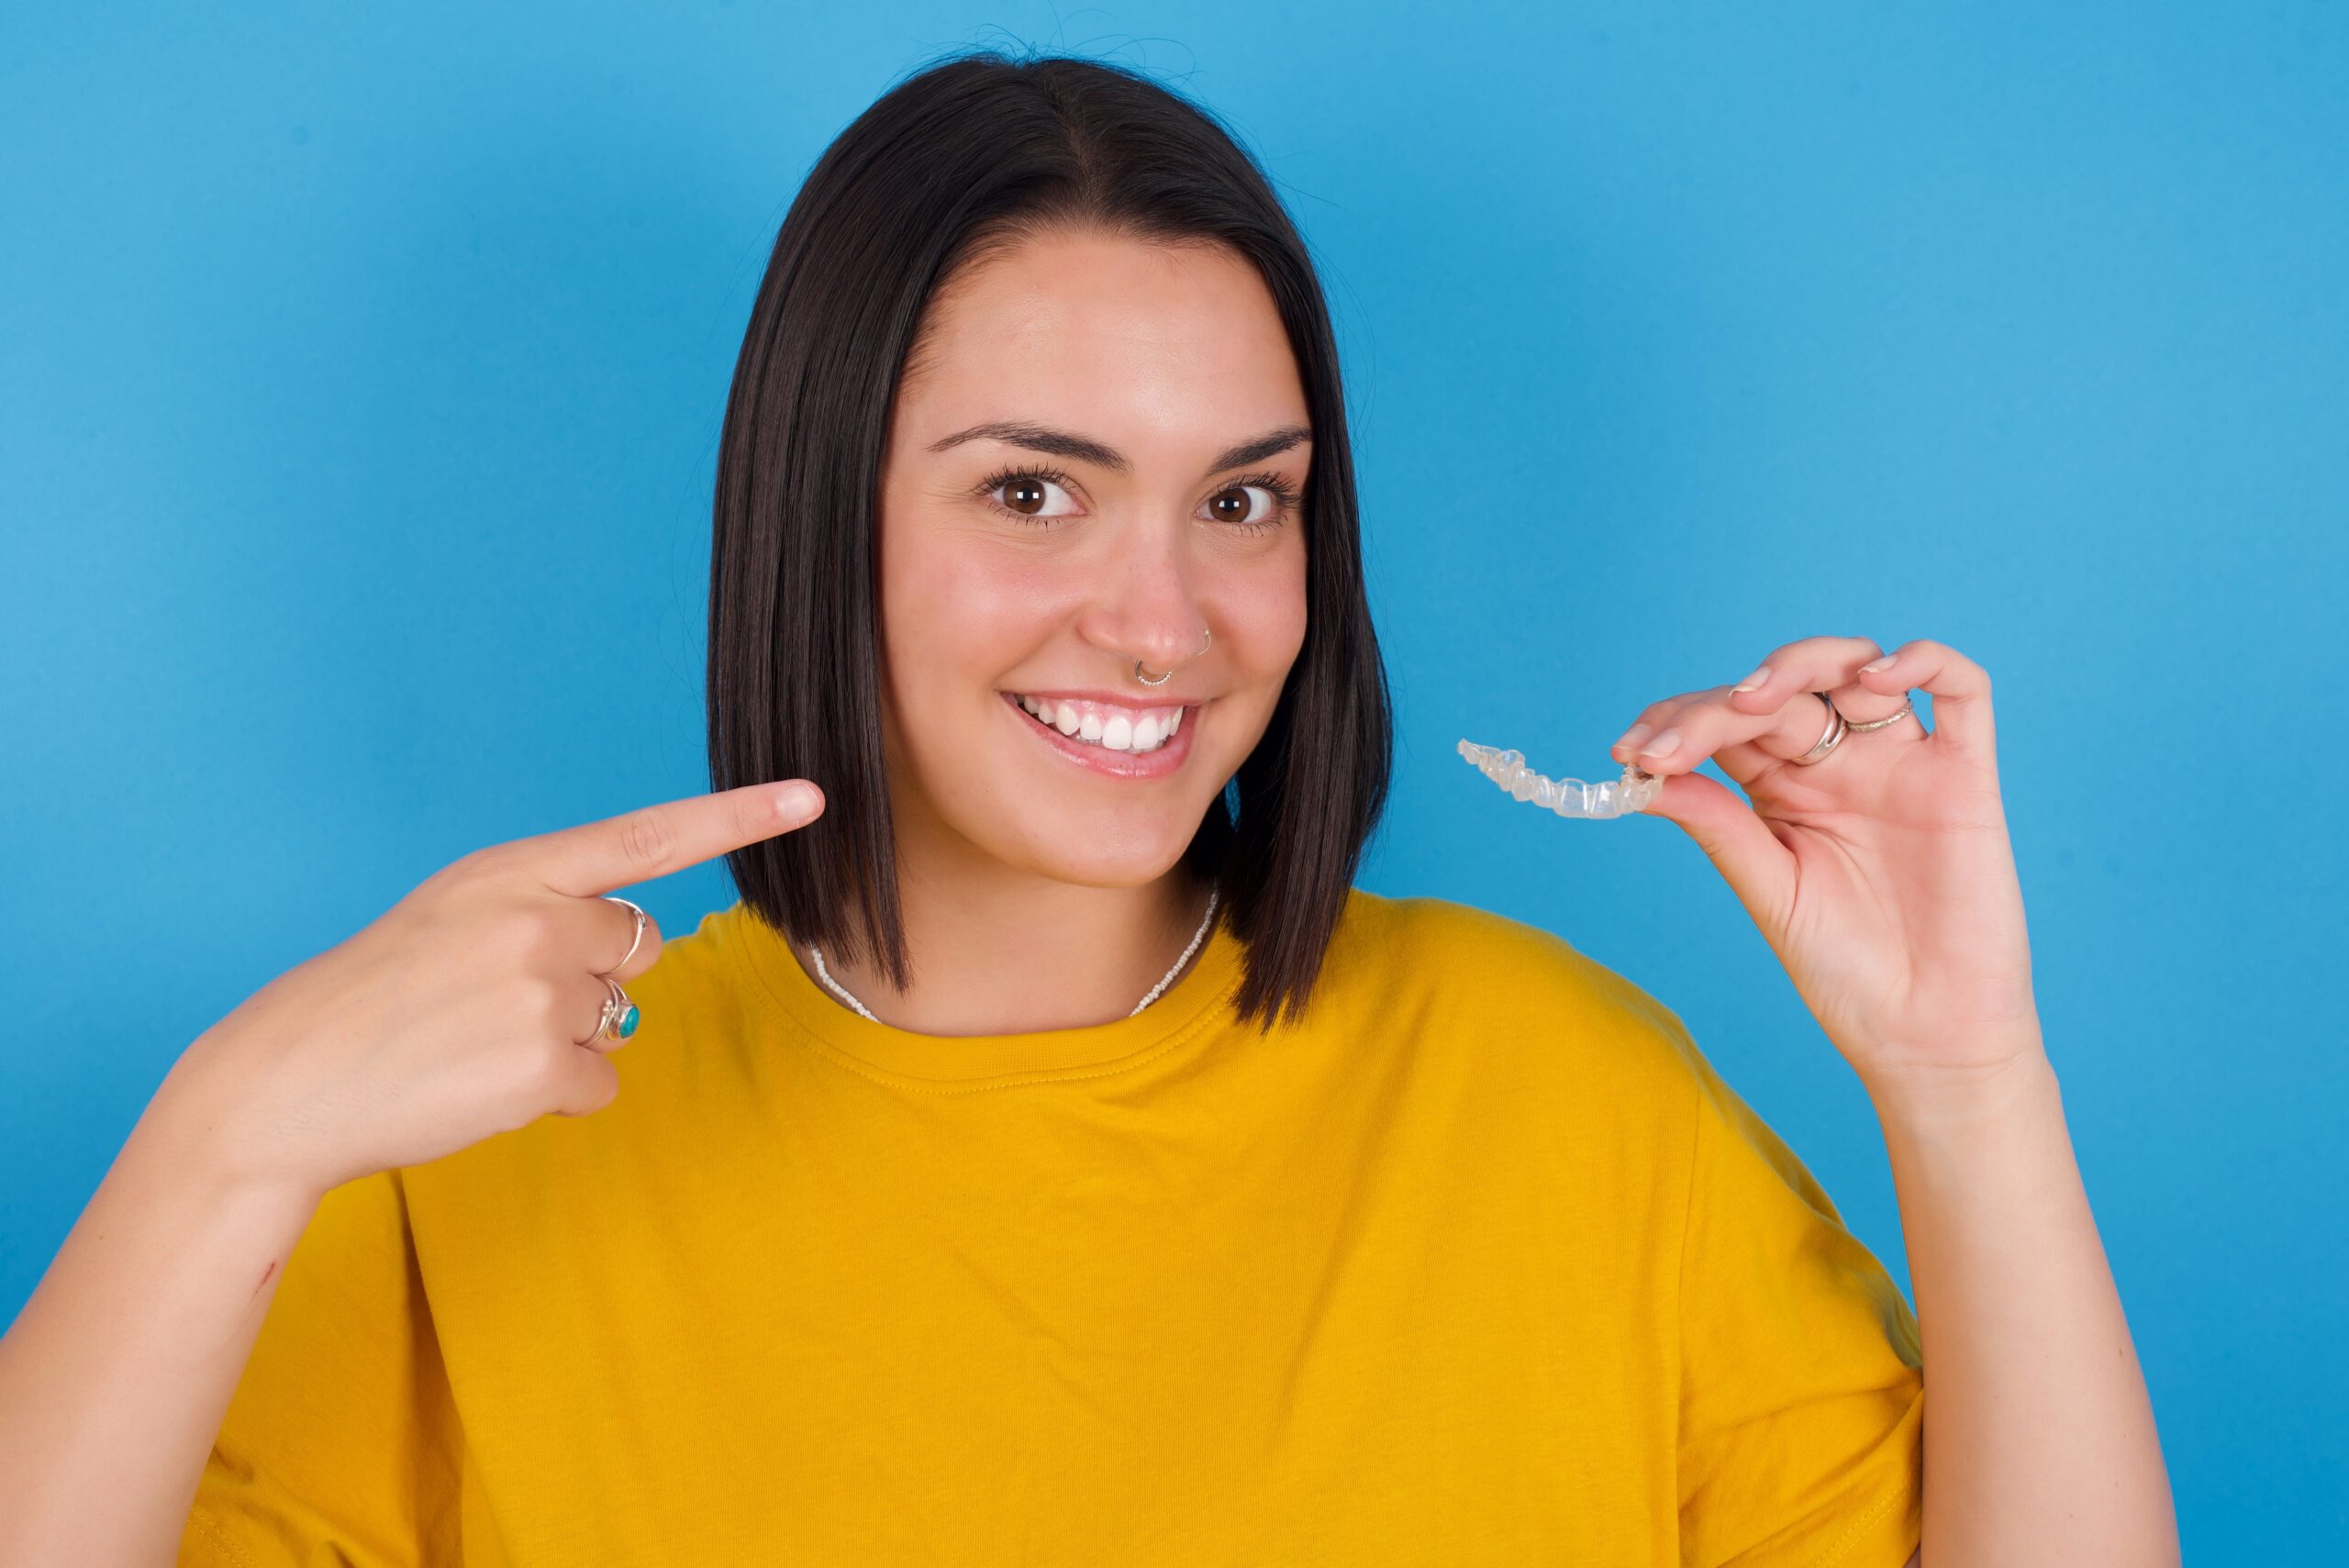 MODEL holding an invisible aligner and pointing to her perfect straight teeth. Dental healthcare and confidence concept.